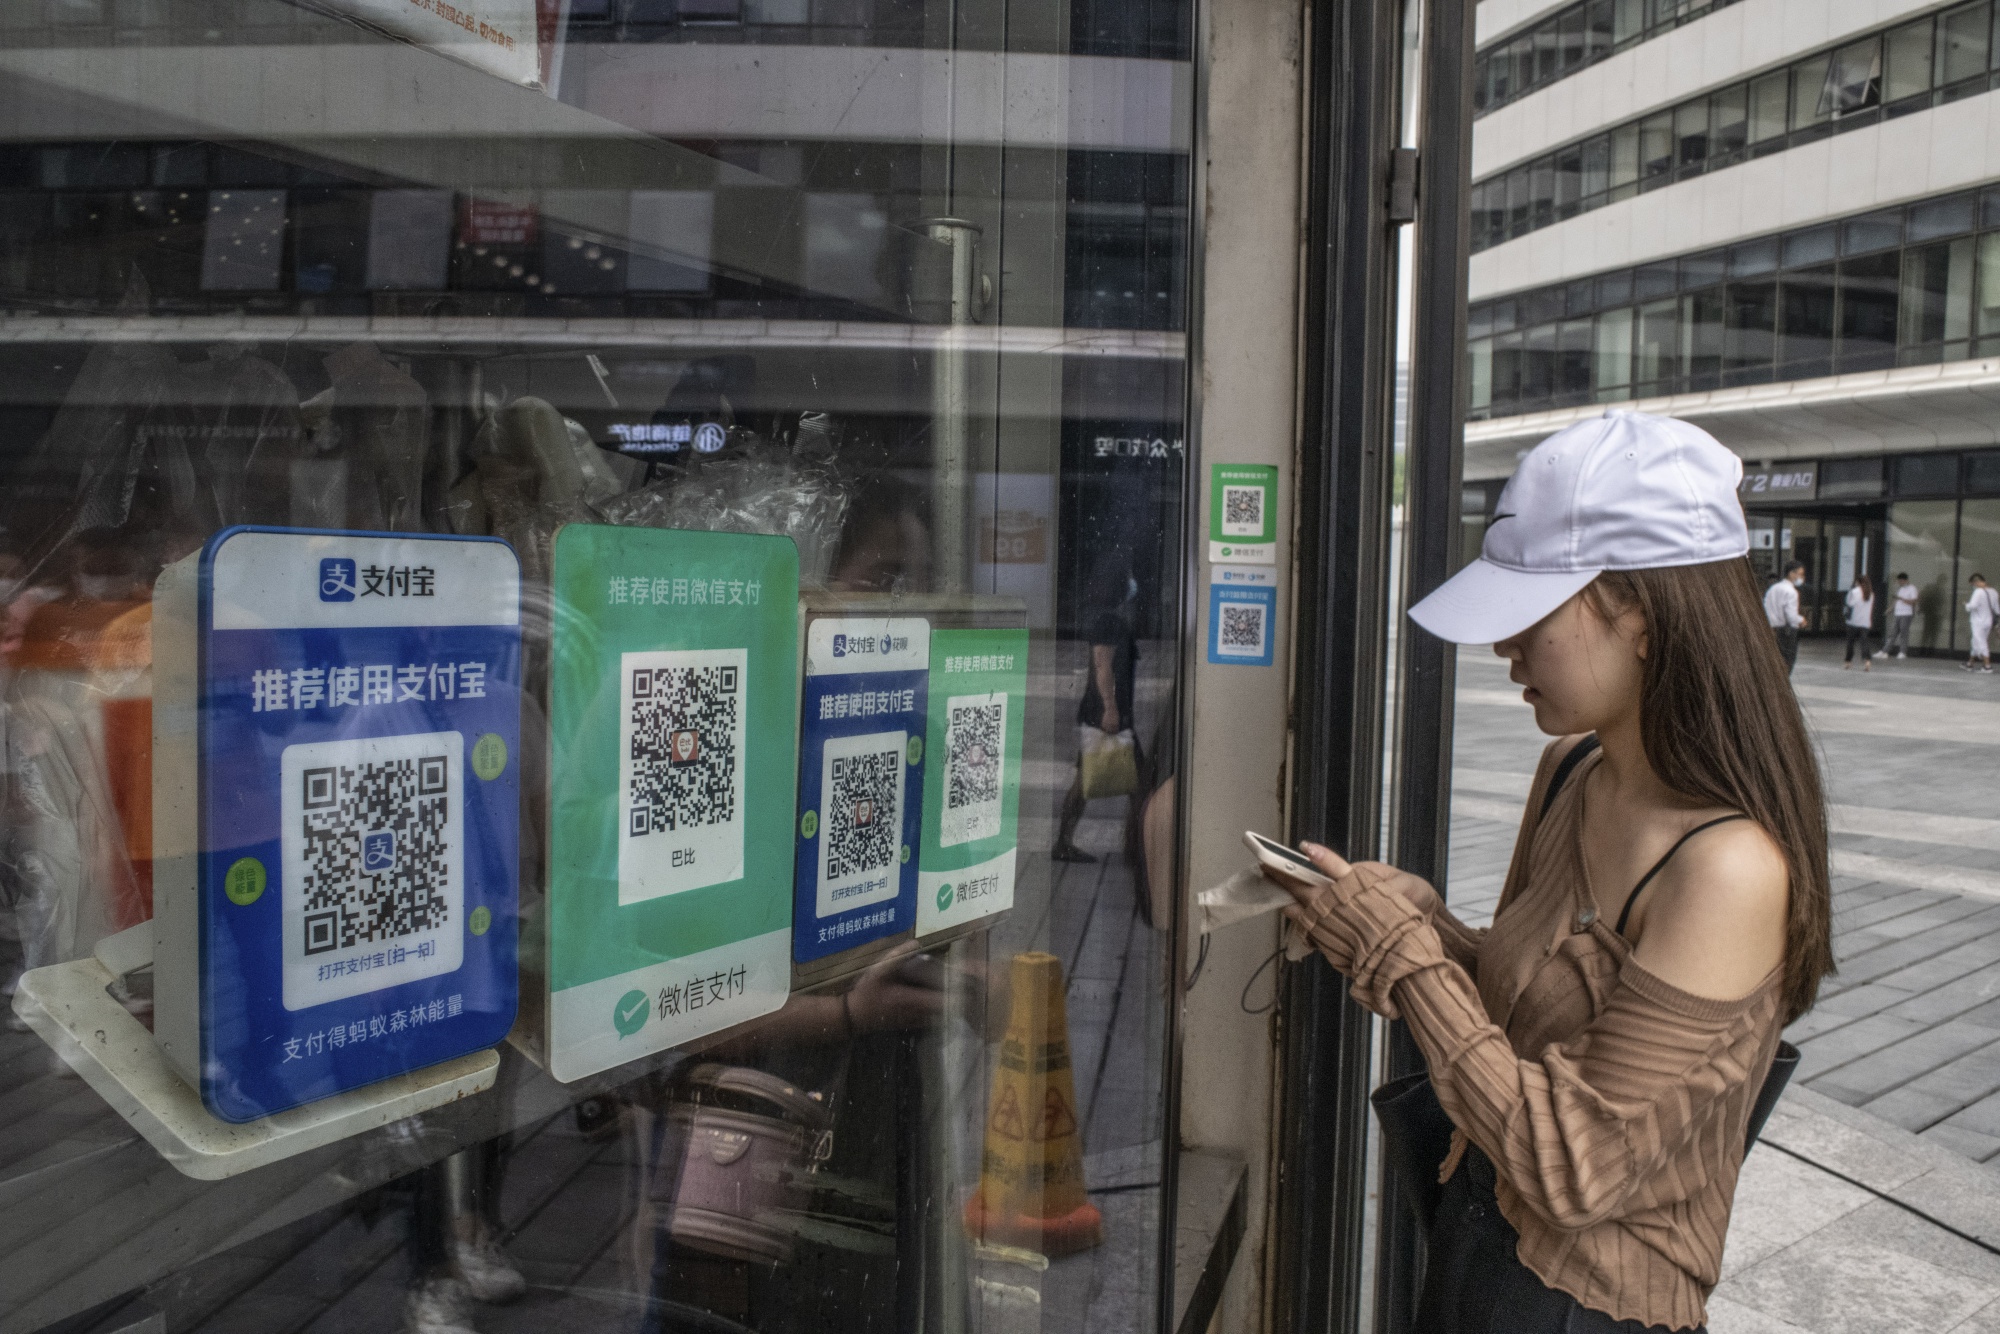 Digital yuan goes head to head with alipay, wechat in beijing